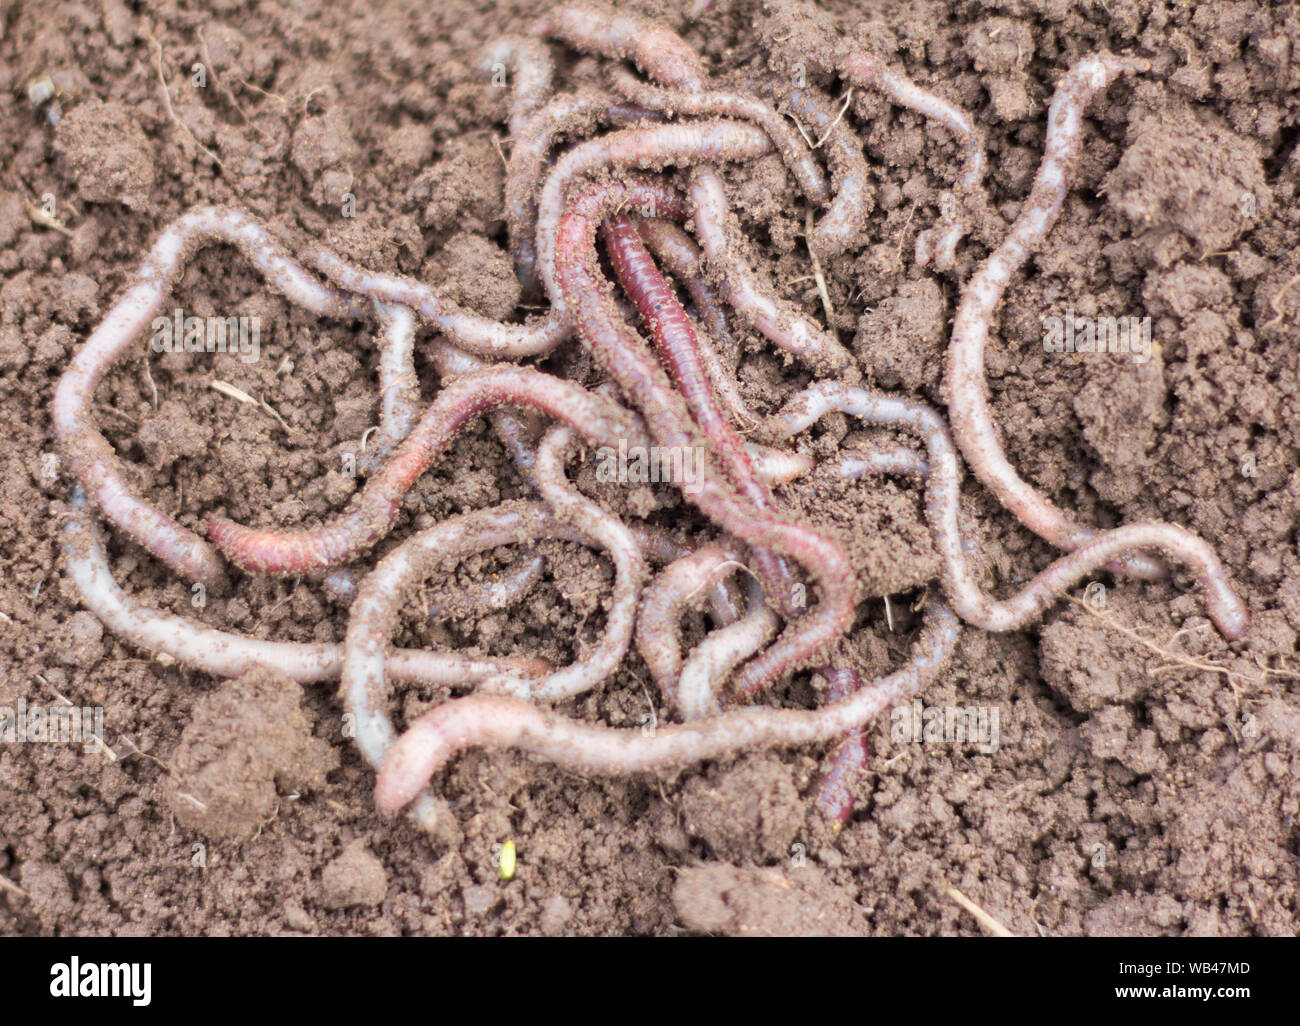 https://c8.alamy.com/comp/WB47MD/macro-shot-of-red-worms-dendrobena-in-manure-earthworm-live-bait-for-fishing-WB47MD.jpg